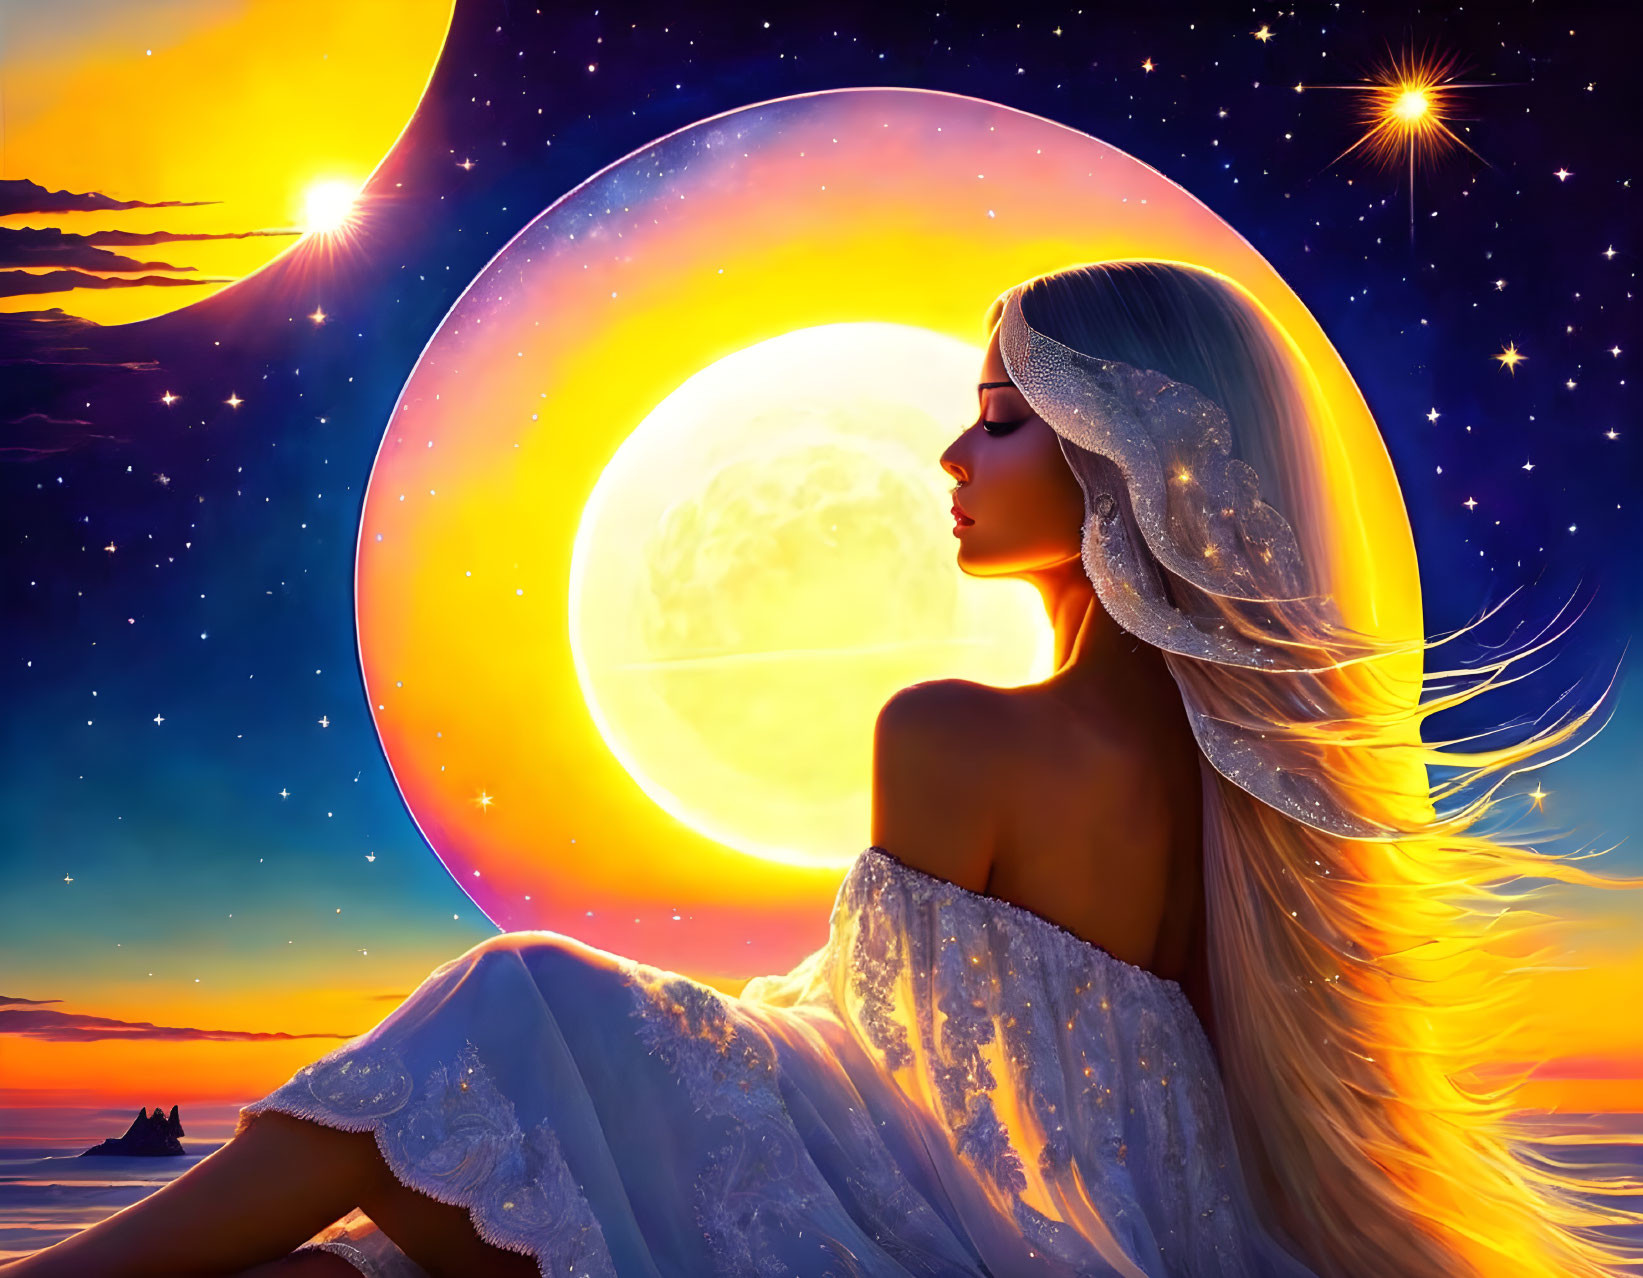 Woman in White Dress Profiled Against Vibrant Sunset with Moon and Stars